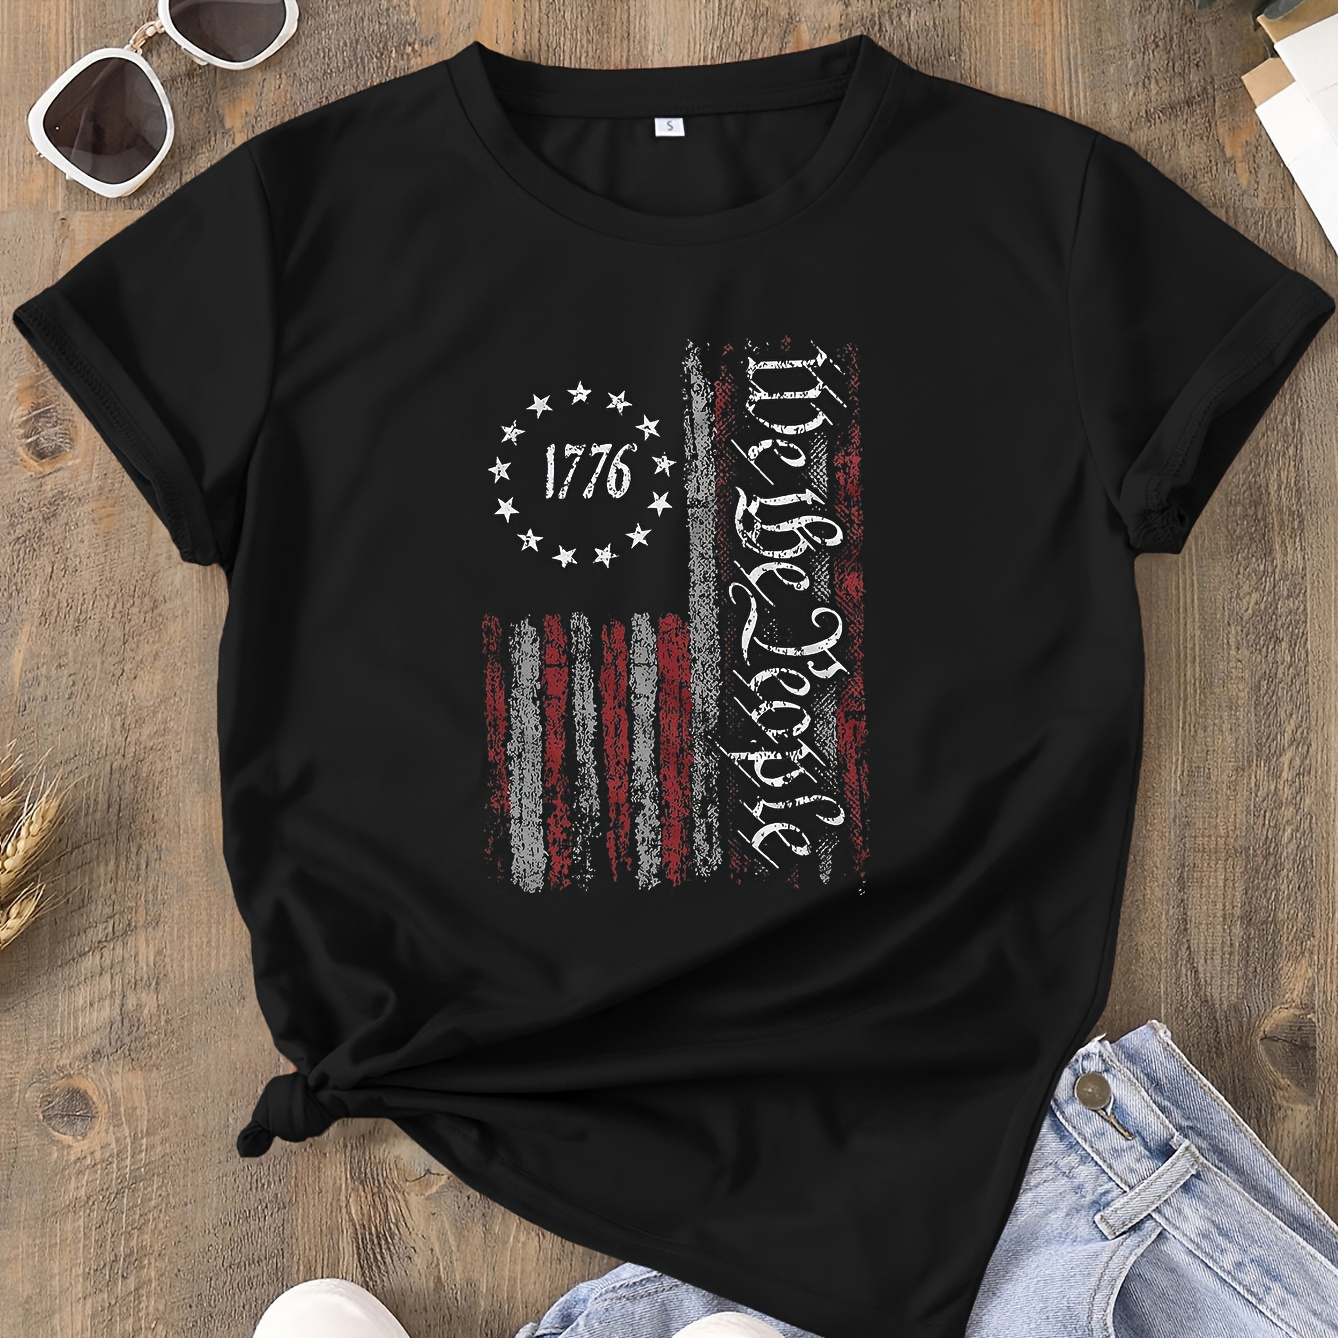 

American Flag Print T-shirt, Short Sleeve Crew Neck Casual Top For Summer & Spring, Women's Clothing